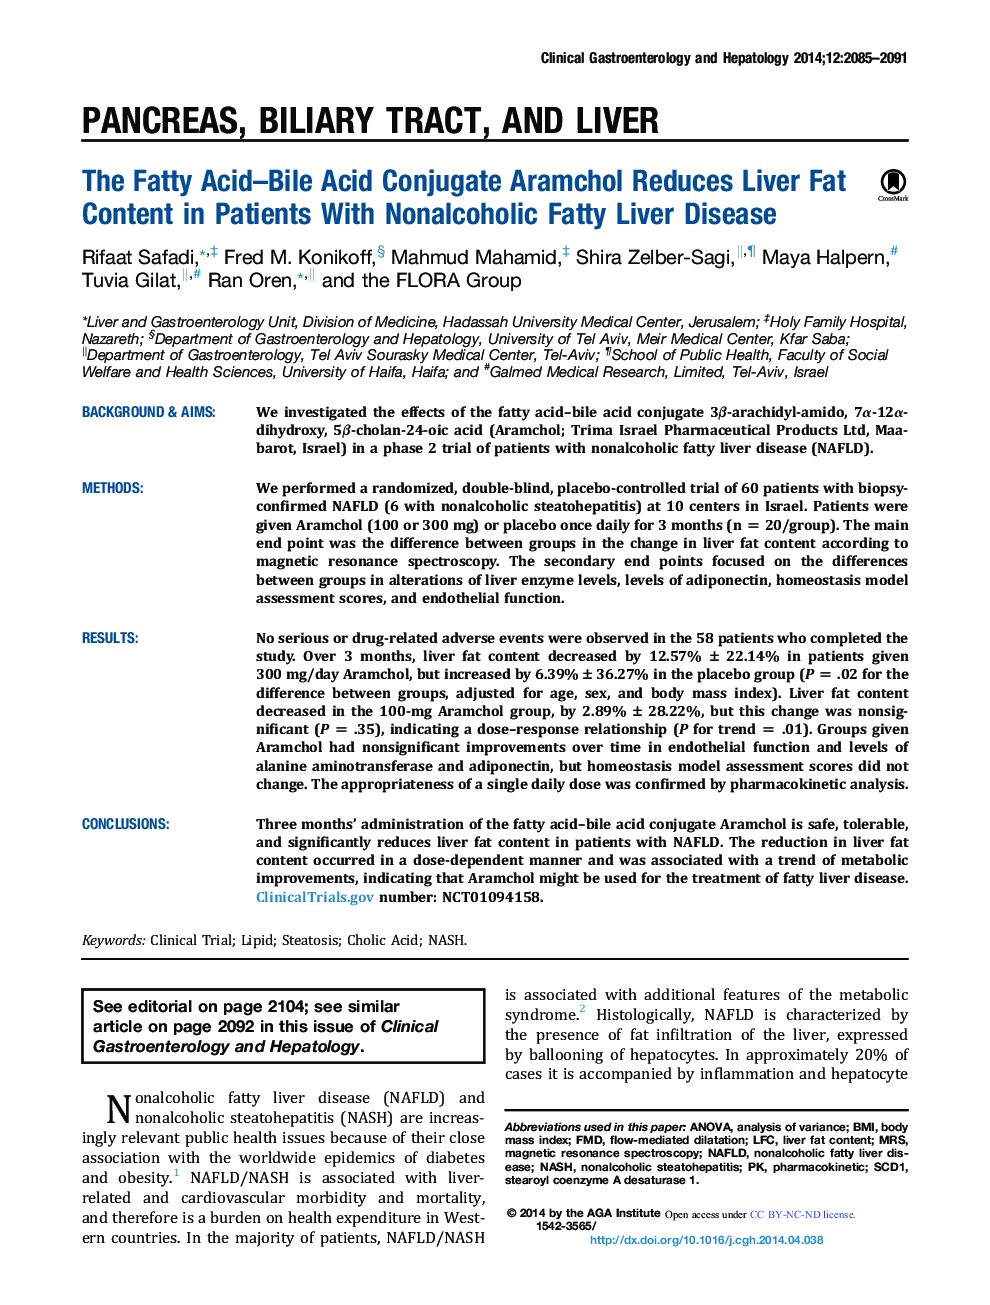 Original articlePancreas, biliary tract, and liverThe Fatty Acid-Bile Acid Conjugate Aramchol Reduces Liver Fat Content in Patients With Nonalcoholic Fatty Liver Disease